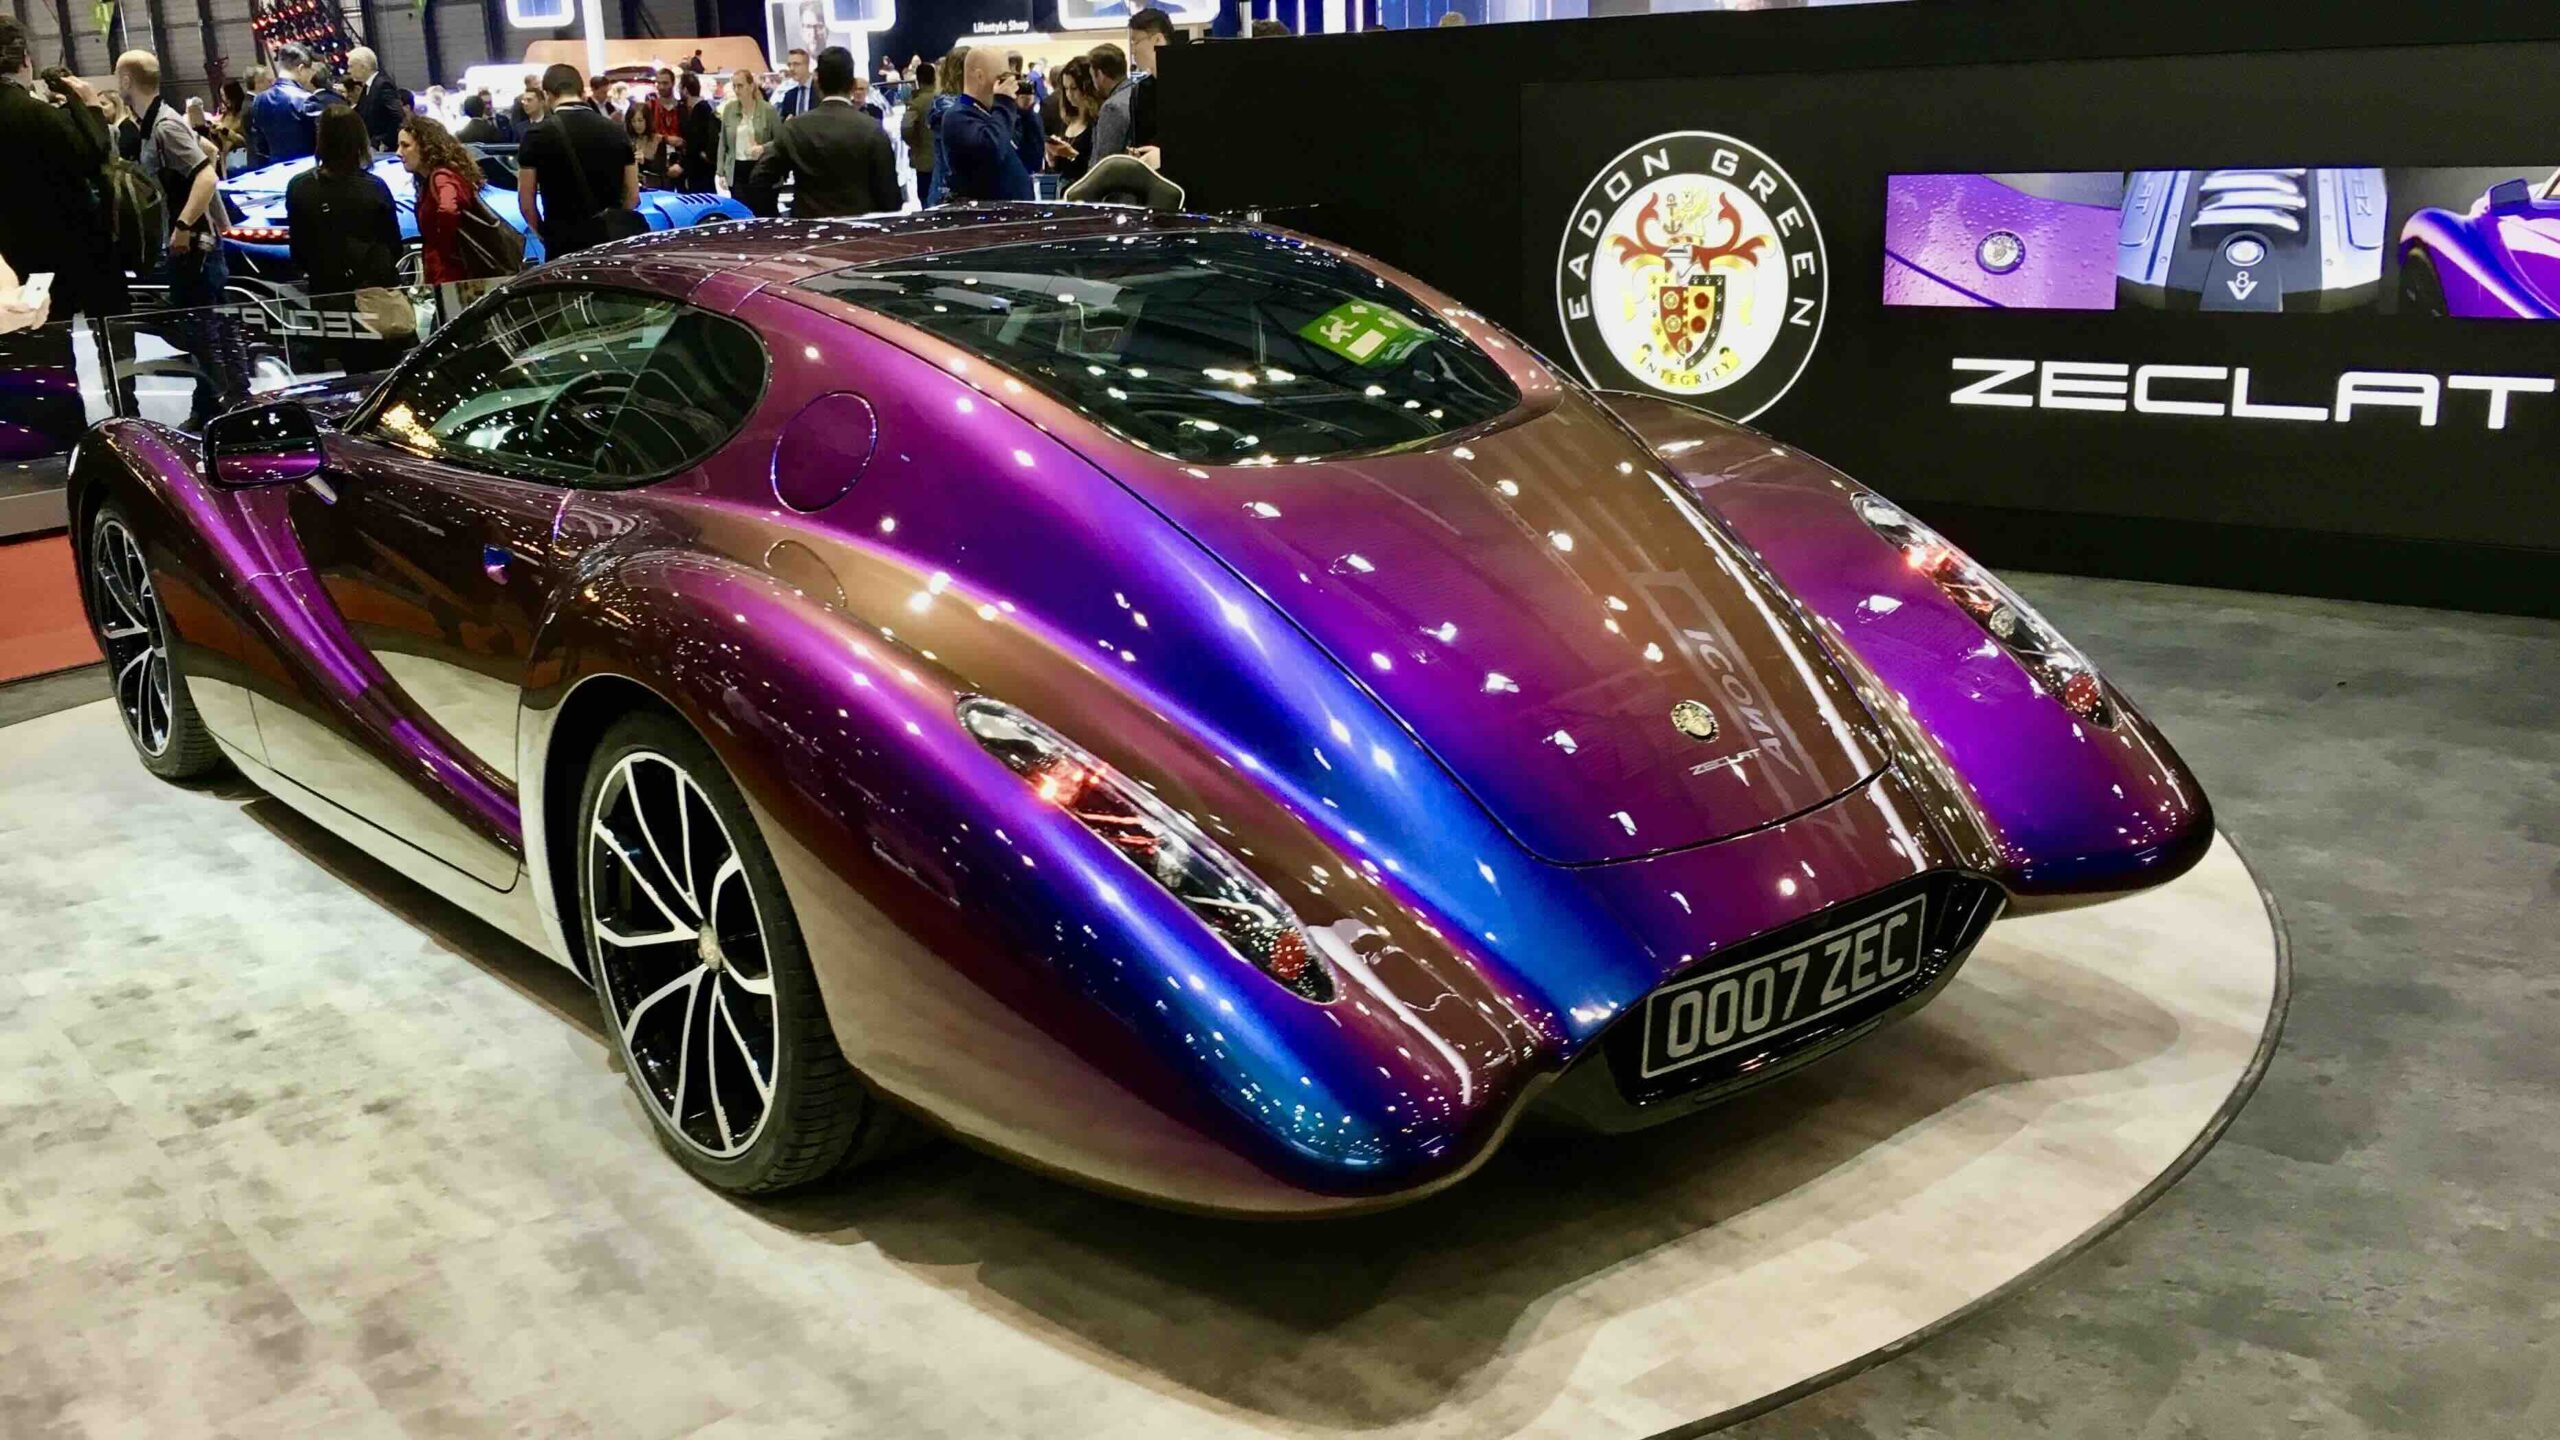 The Zeclat at the Geneva Car Show Photo by TMA Howe